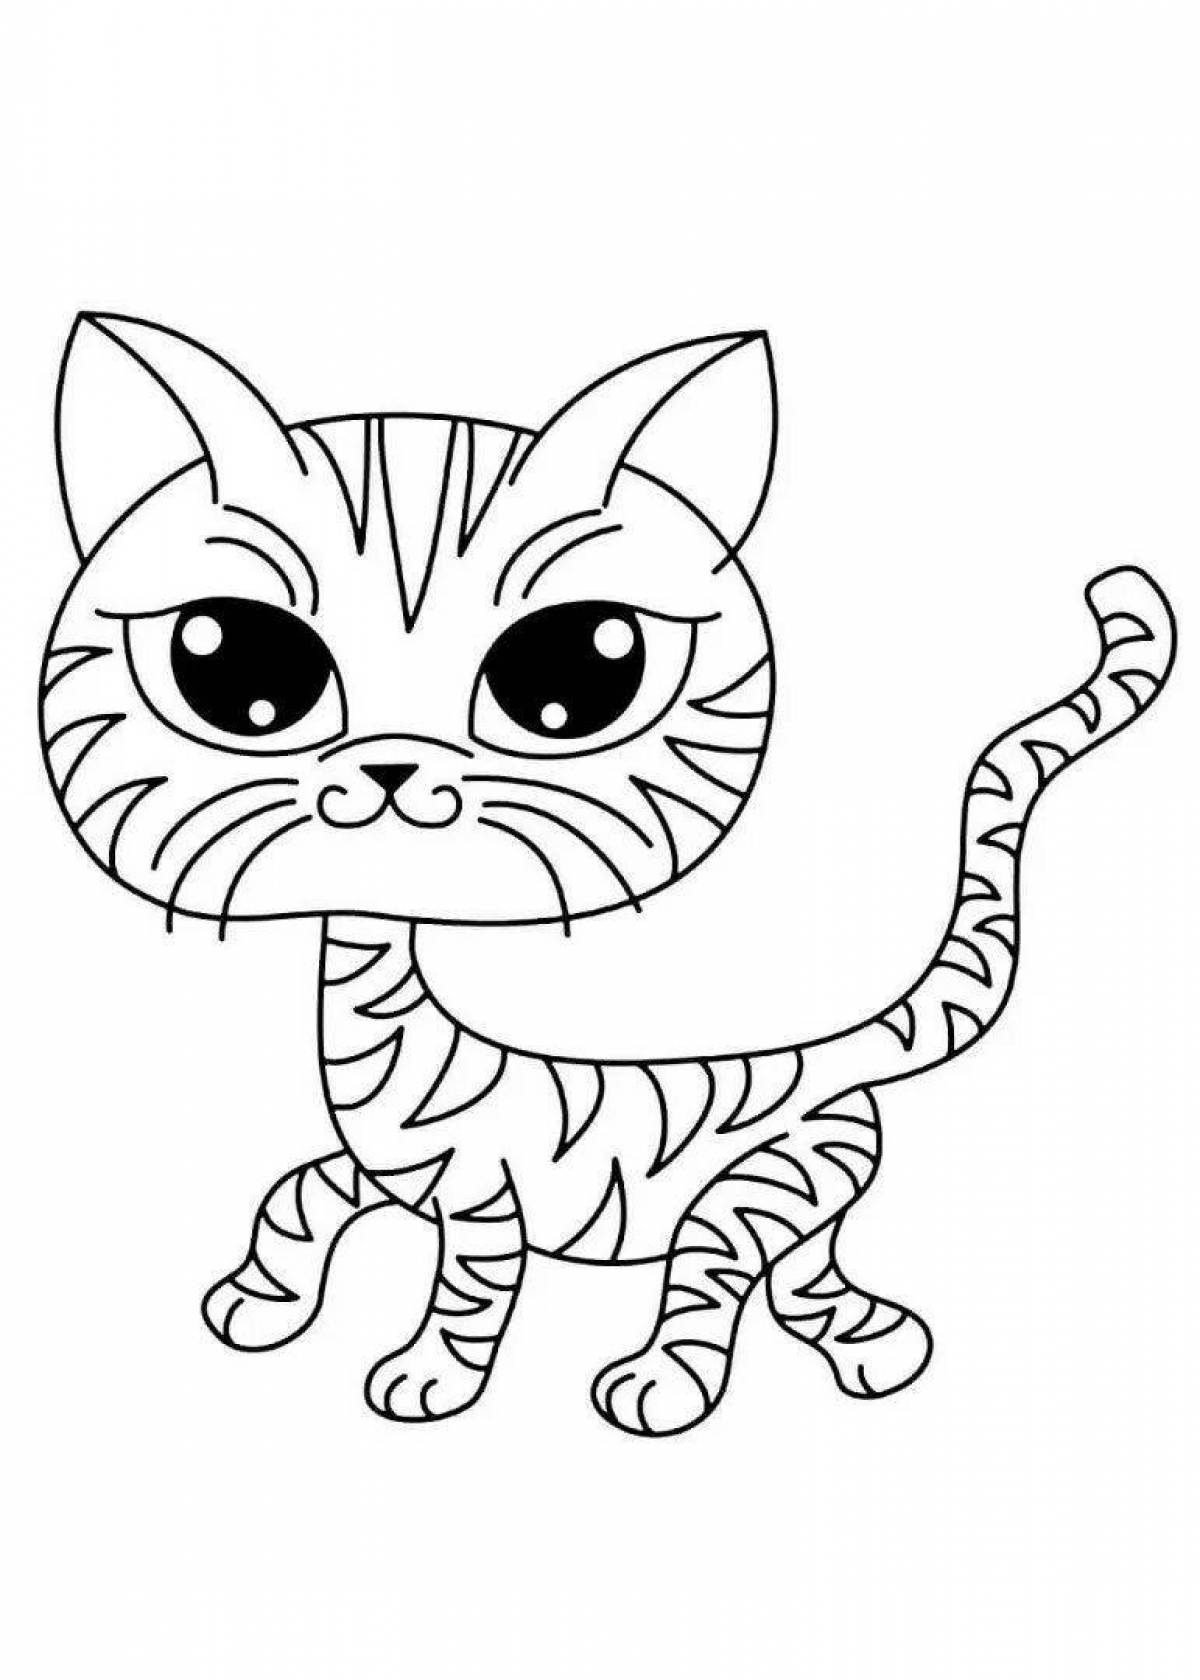 Curious cat coloring page